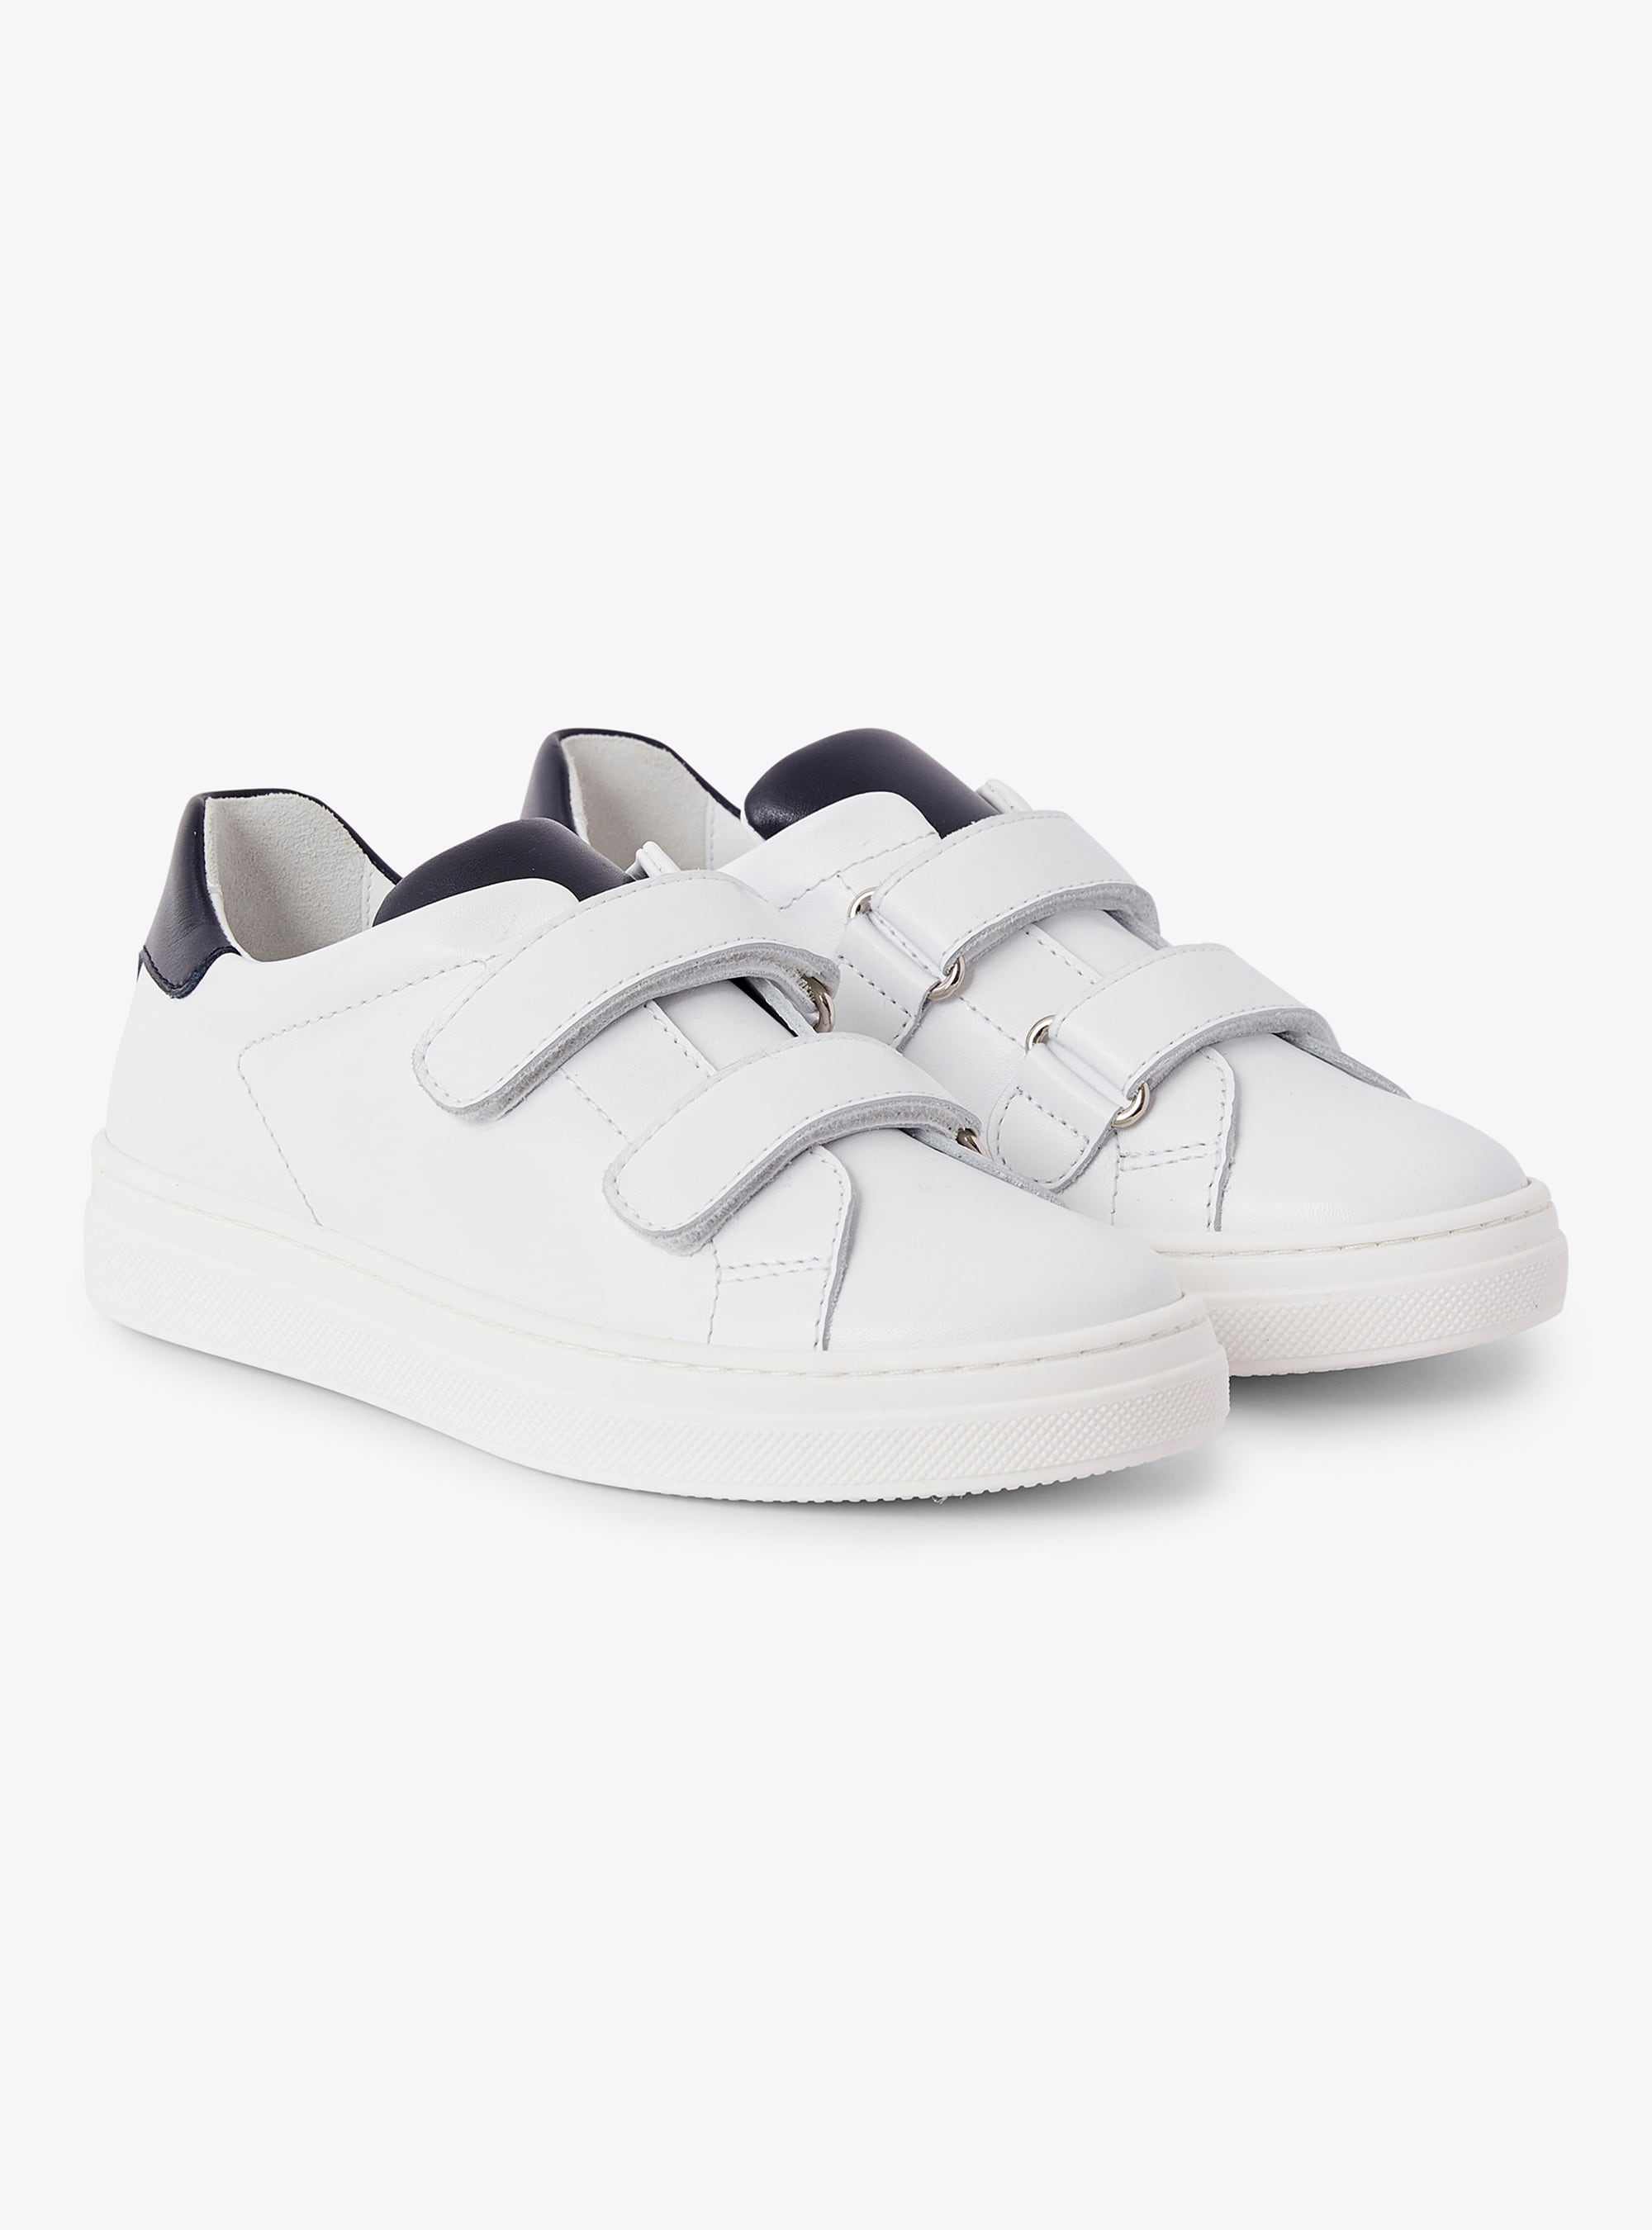 White leather sneakers with riptape straps - Shoes - Il Gufo